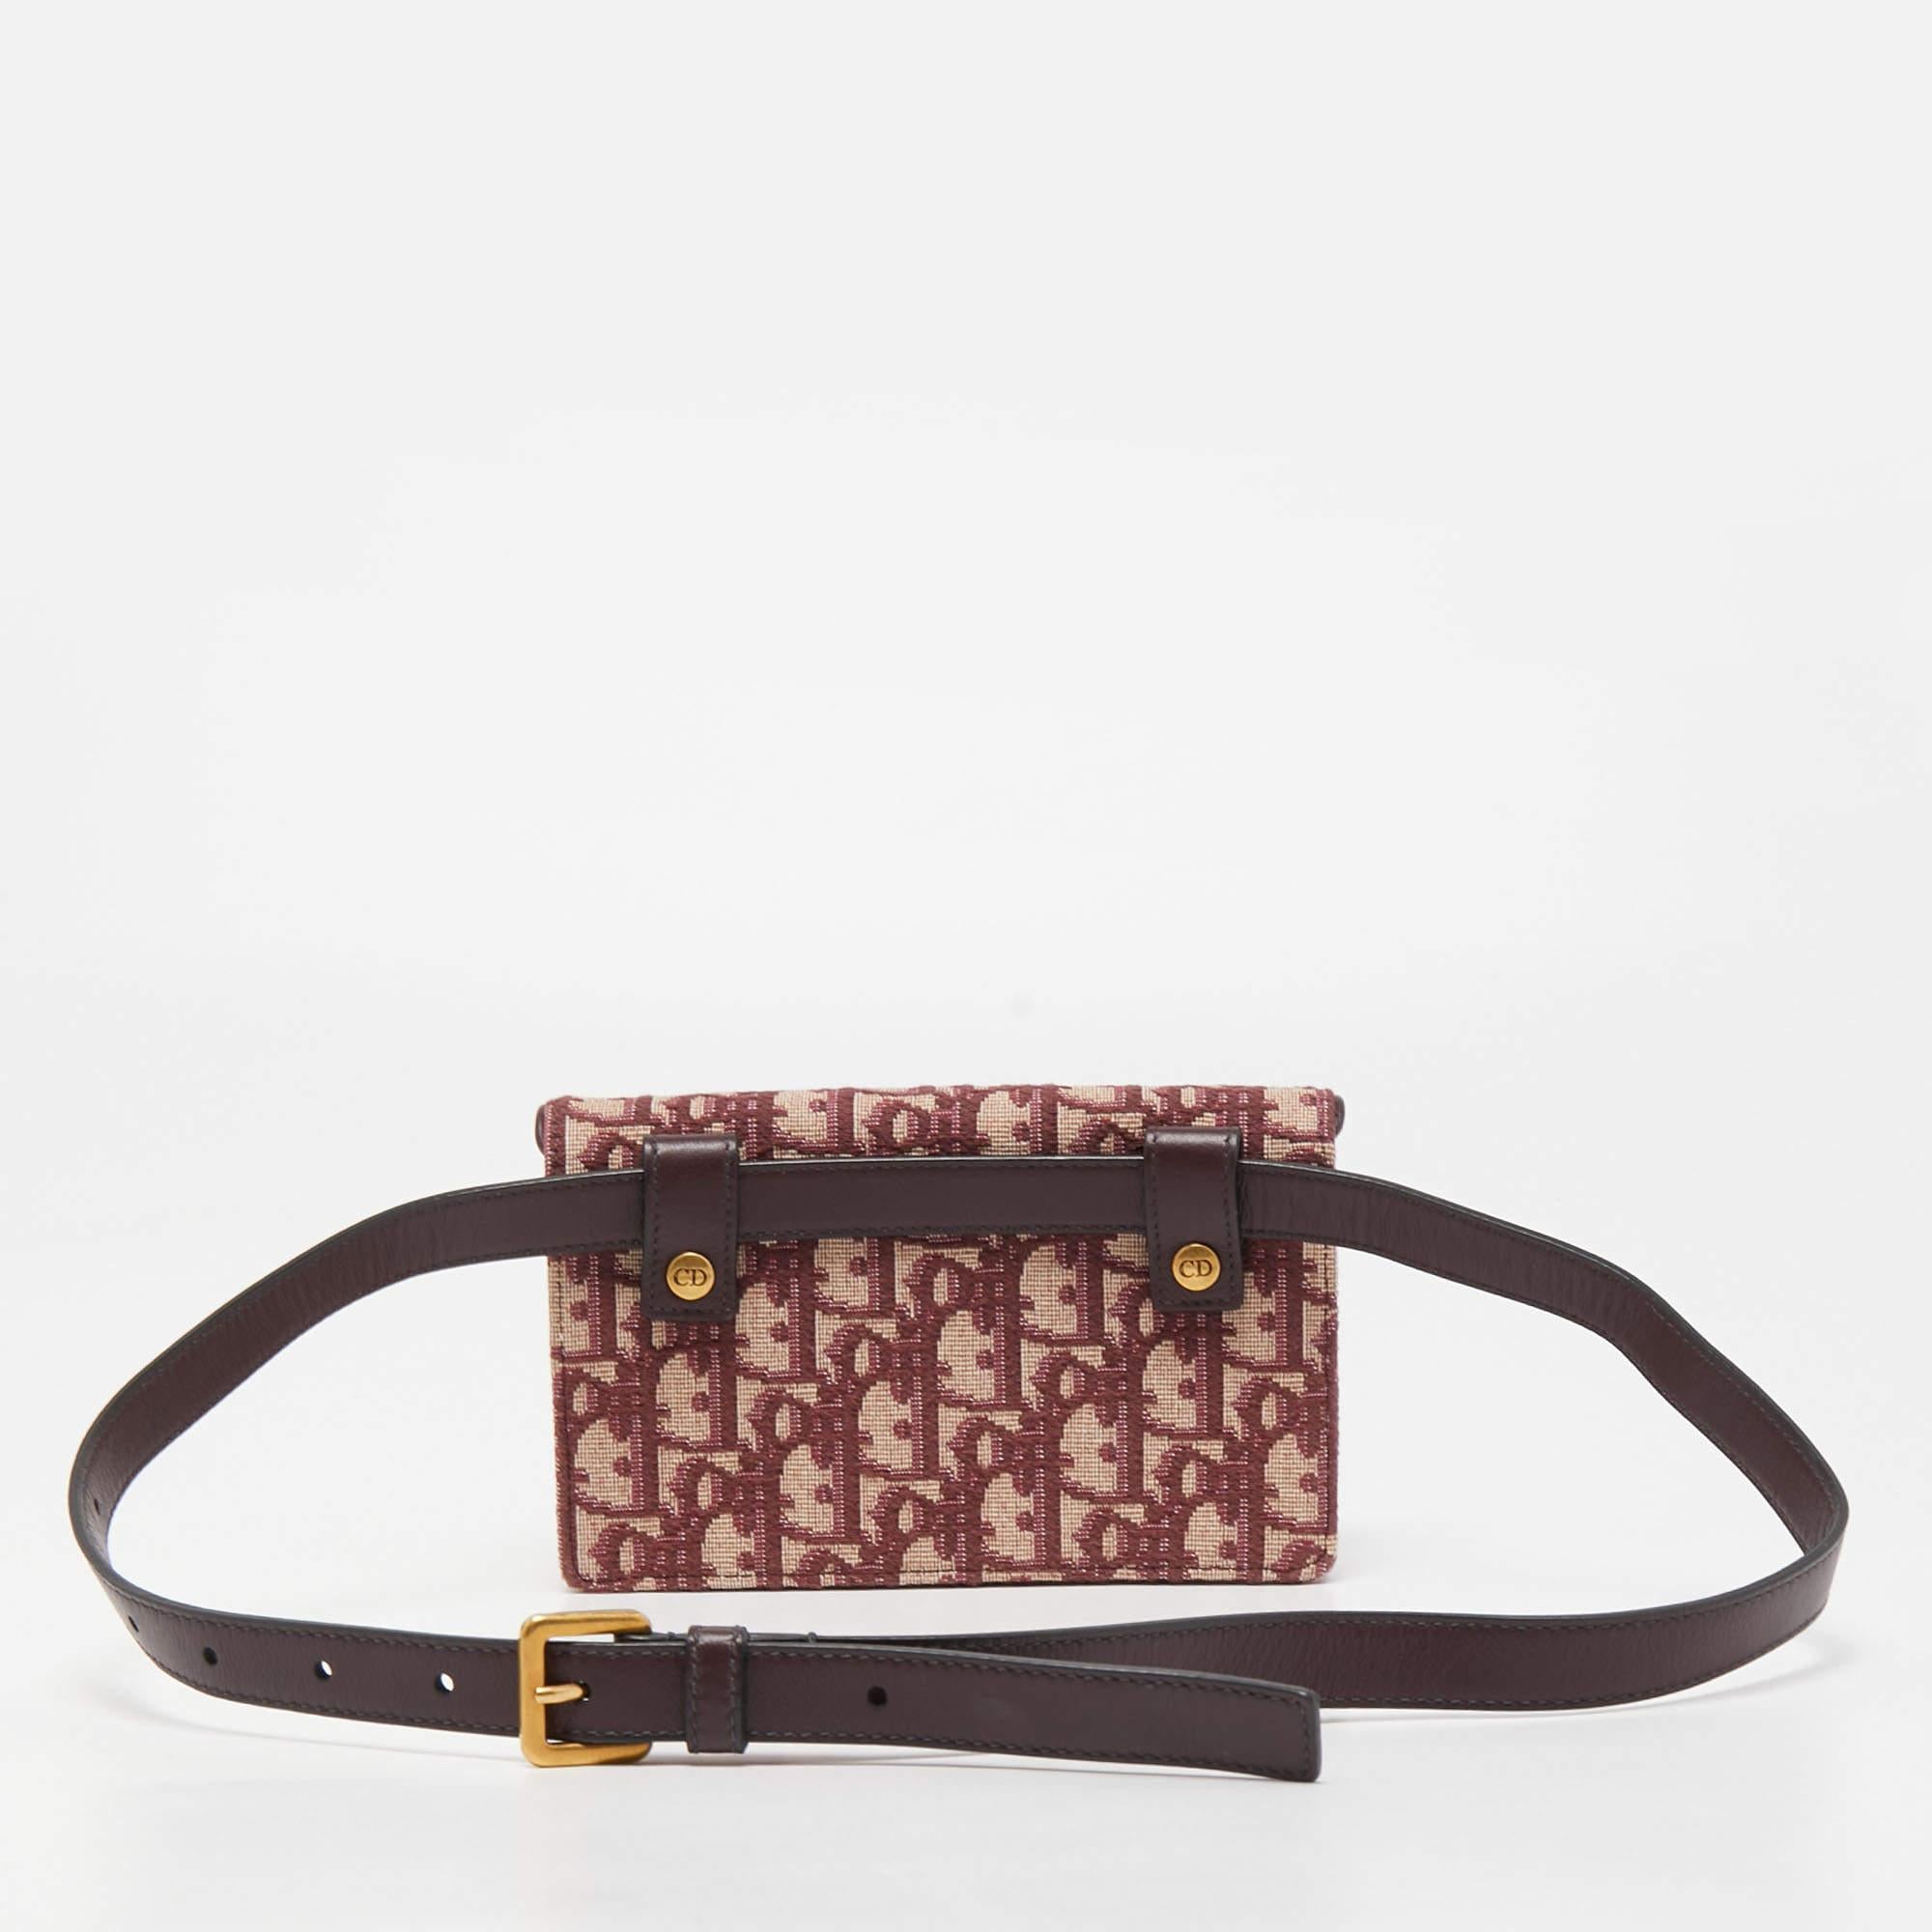 Designed to be carried around the waist or by hand, this Saddle belt bag by Dior speaks of all things being fashionable. It is made from oblique canvas and designed in the likeness of the brand's famous Saddle bag. The bag has a removable leather